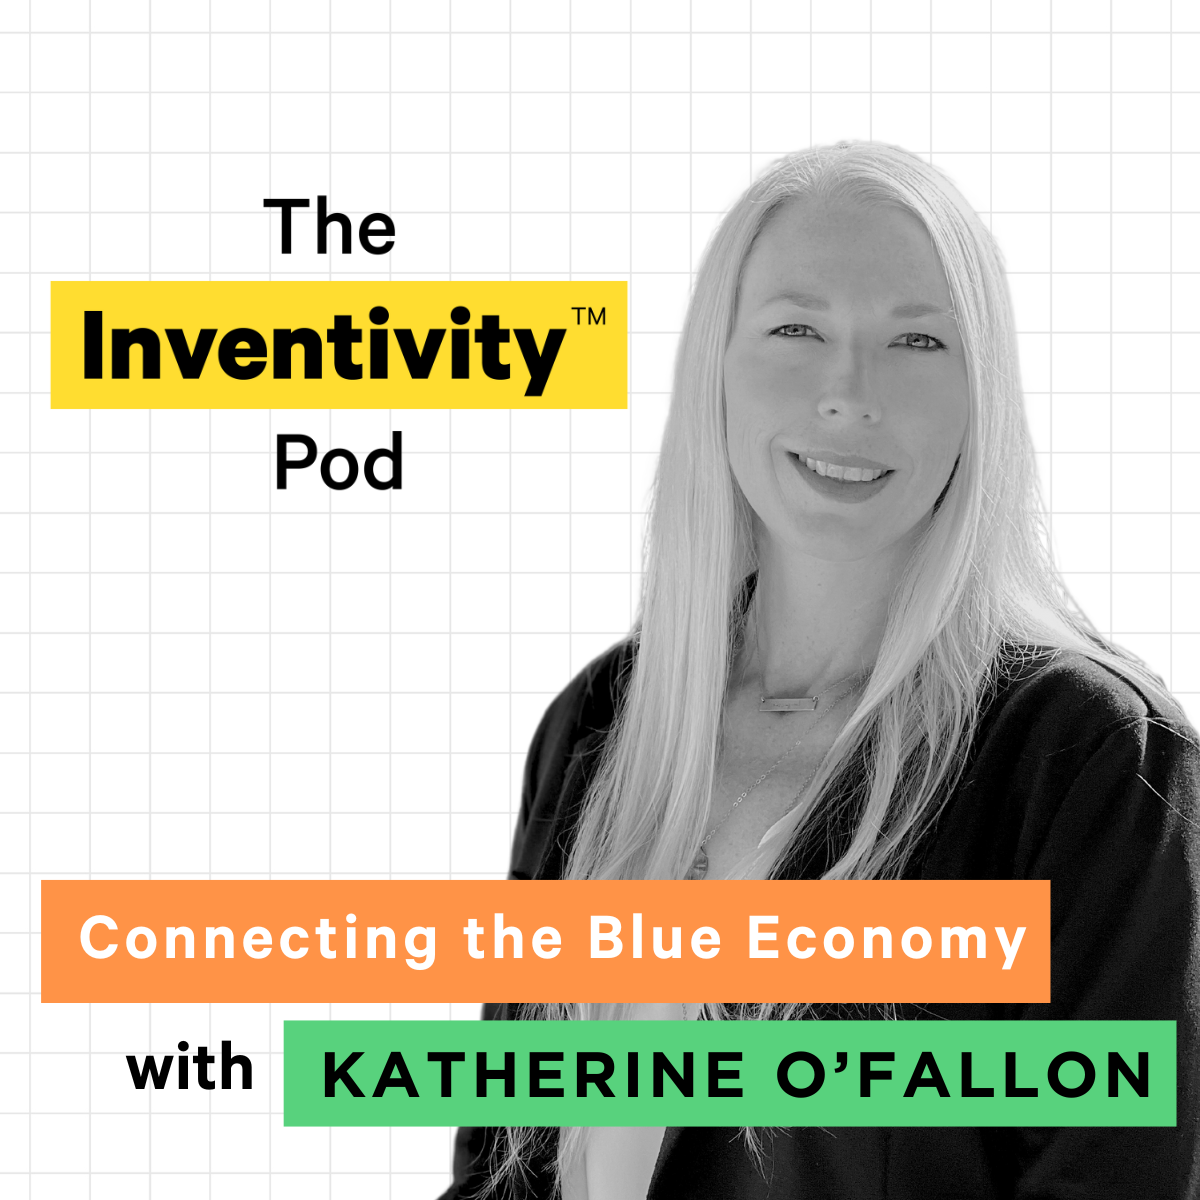 Connecting the Blue Economy with Katherine O’Fallon